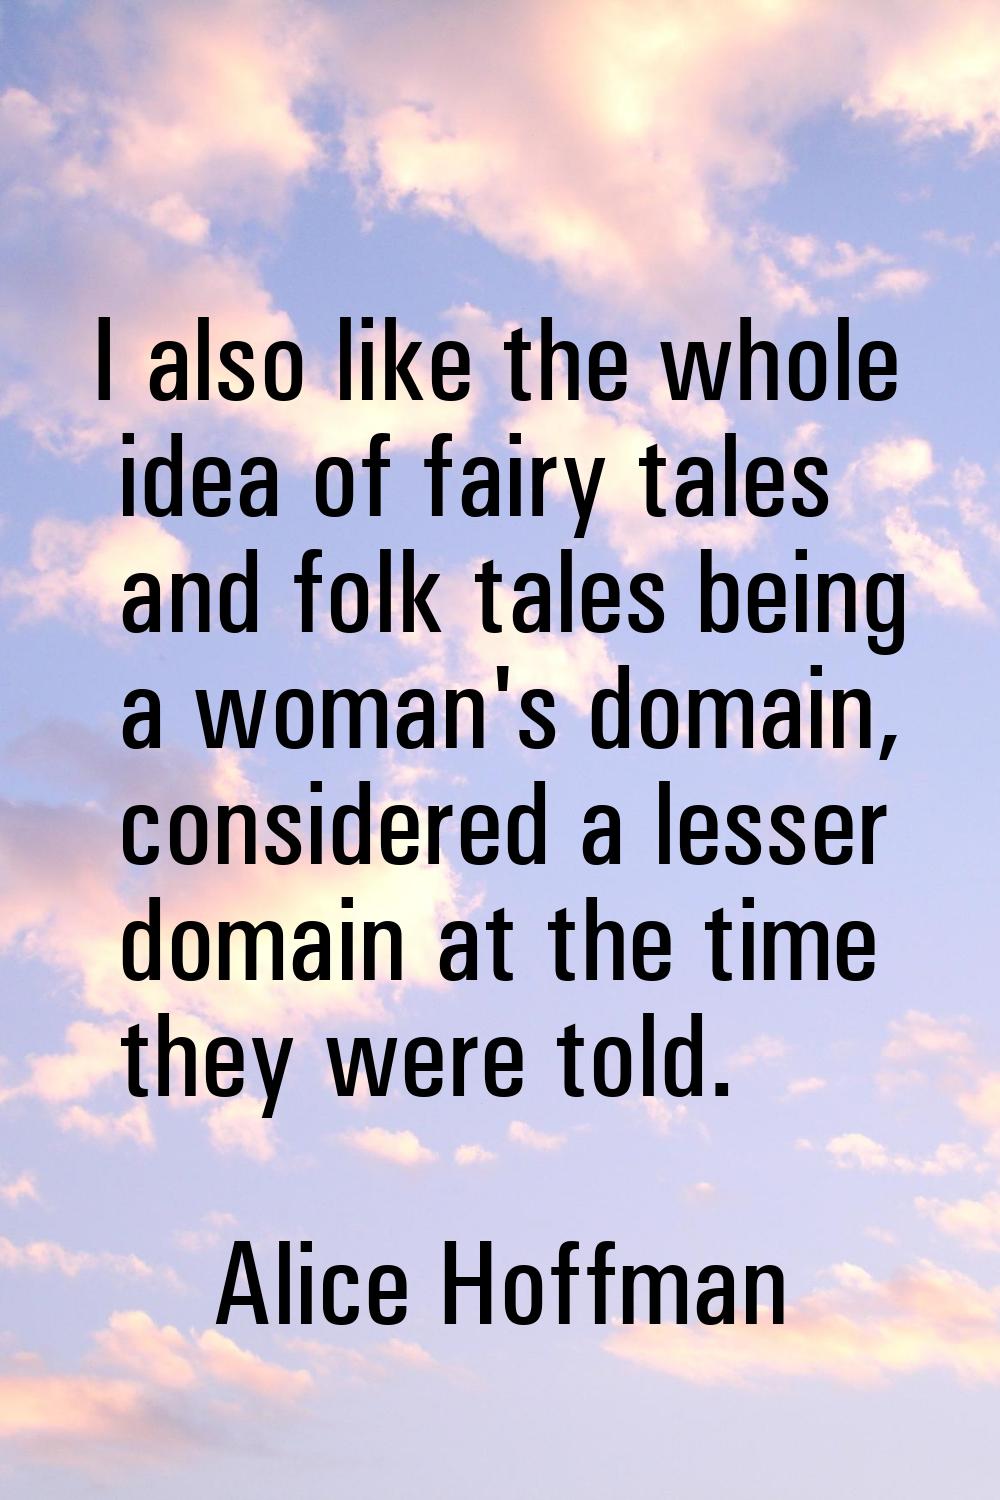 I also like the whole idea of fairy tales and folk tales being a woman's domain, considered a lesse